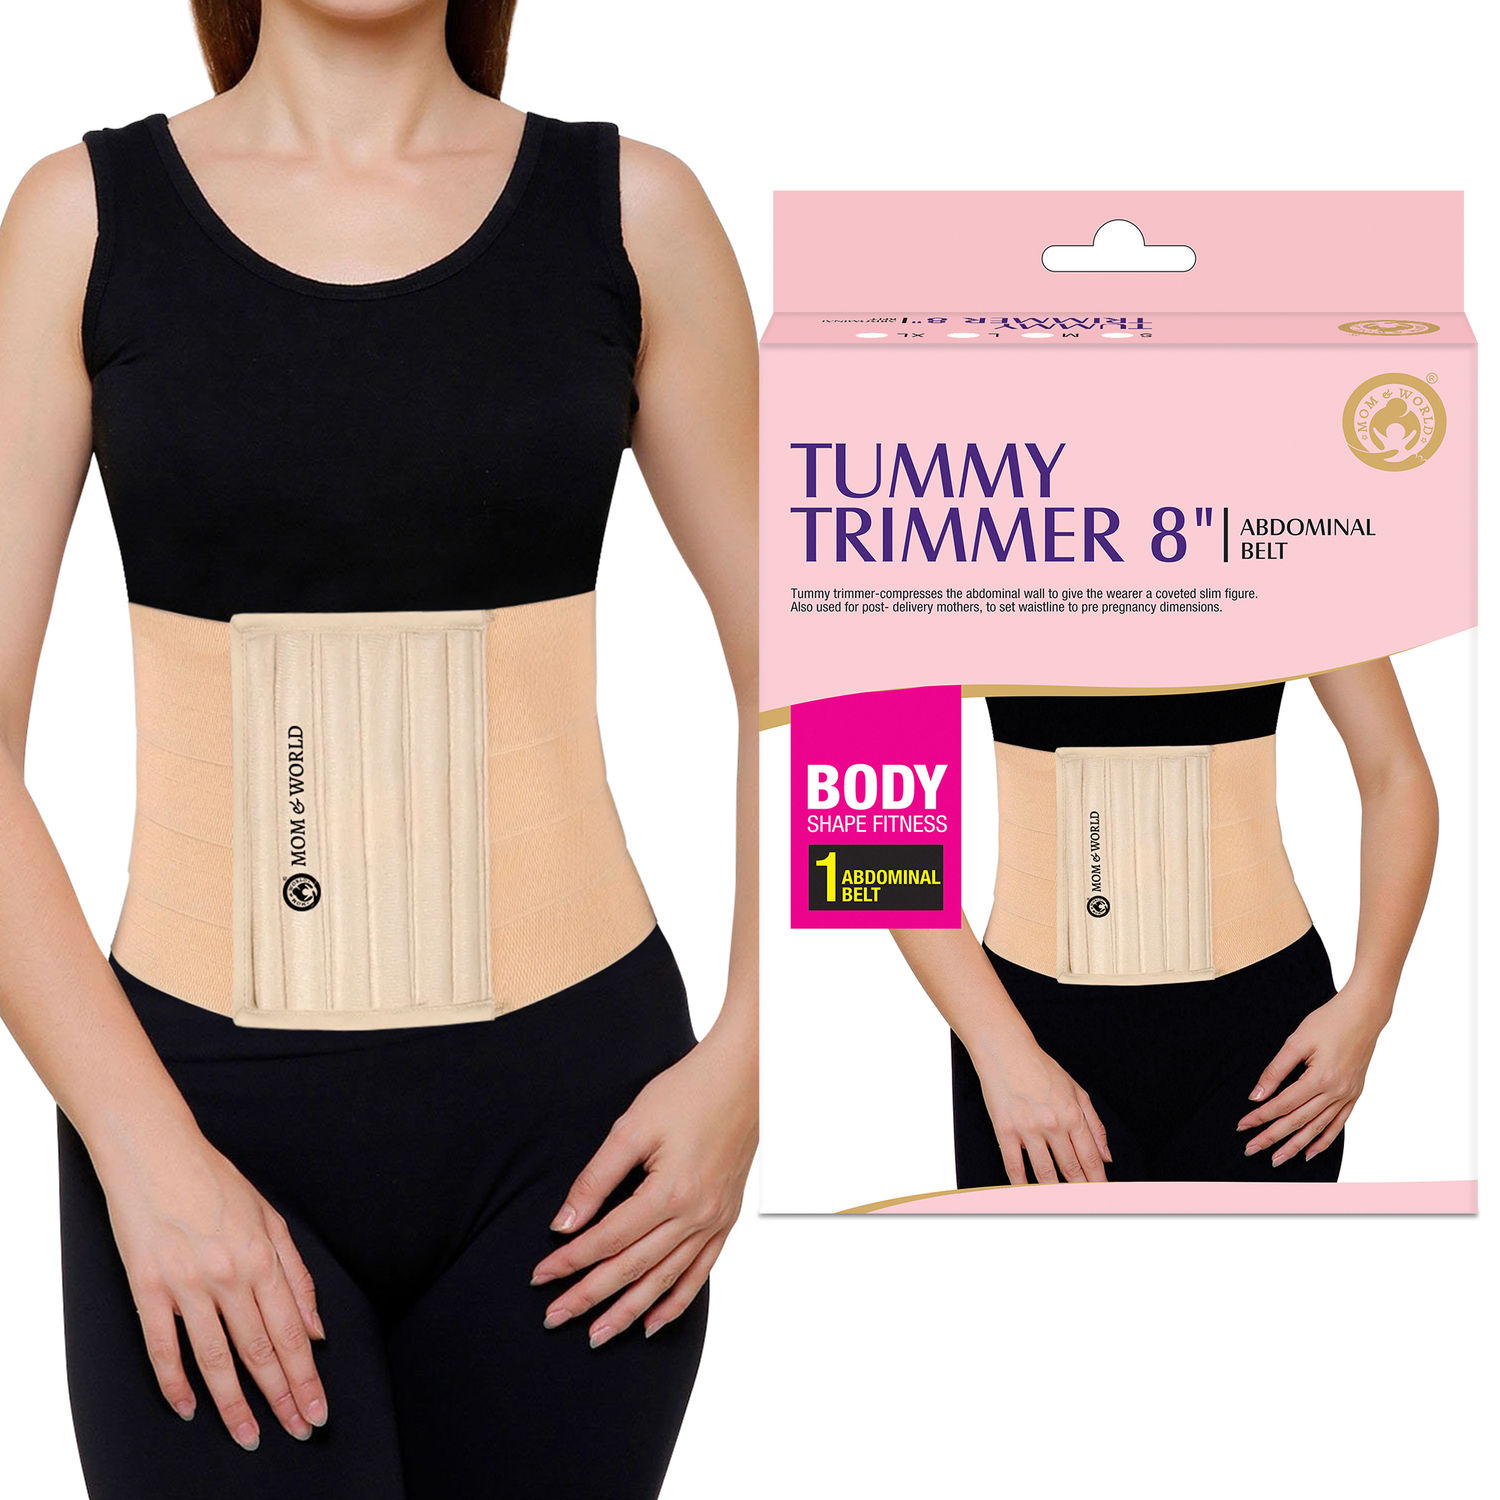 https://media6.ppl-media.com//tr:h-750,w-750,c-at_max,dpr-2/static/img/product/287635/mom-and-world-tummy-trimmer-8-abdominal-belt-body-shaper-belt-slimming-looks-belt-for-stomach-brown-colour-belt-xl-size_1_display_1651658282_a2002e6d.jpg